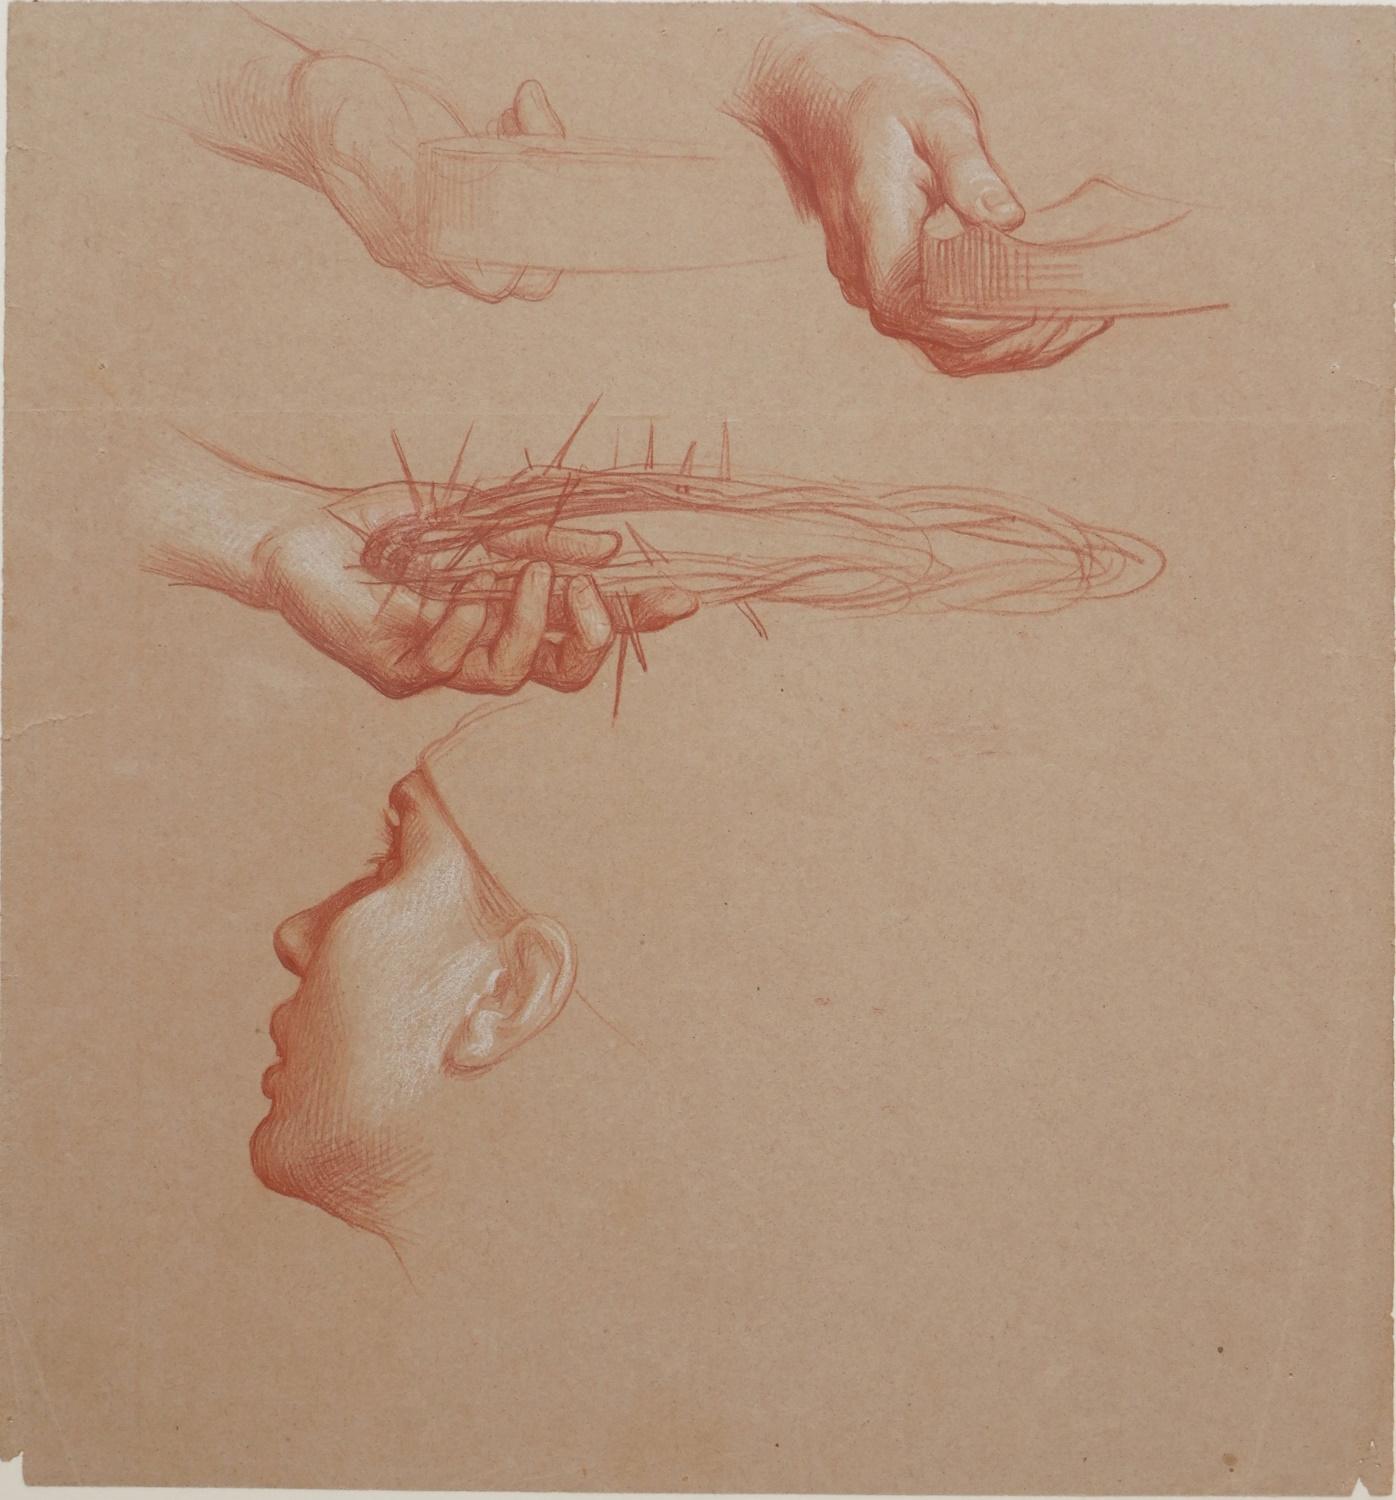 European School c.1860 – Studies of a Head and Hands Holding a Crown of Thorns